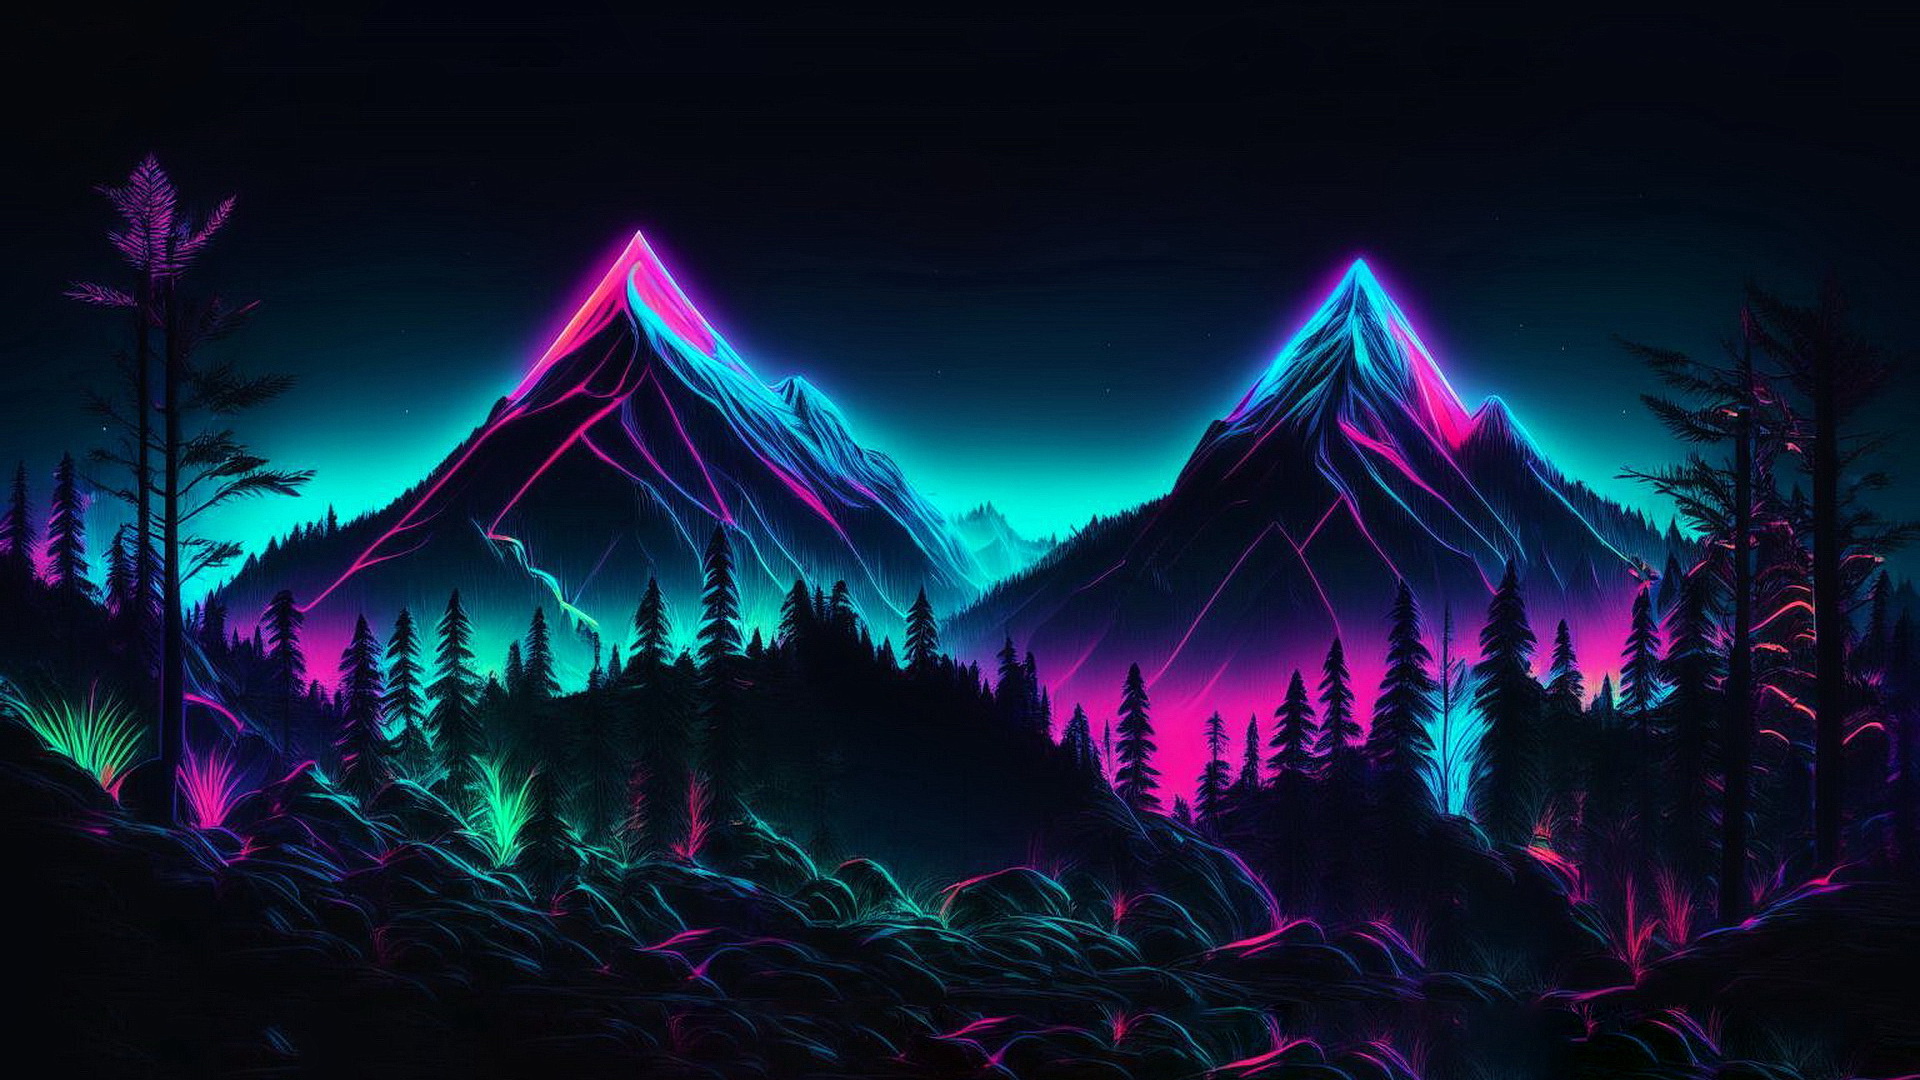 The night forest against the mountains